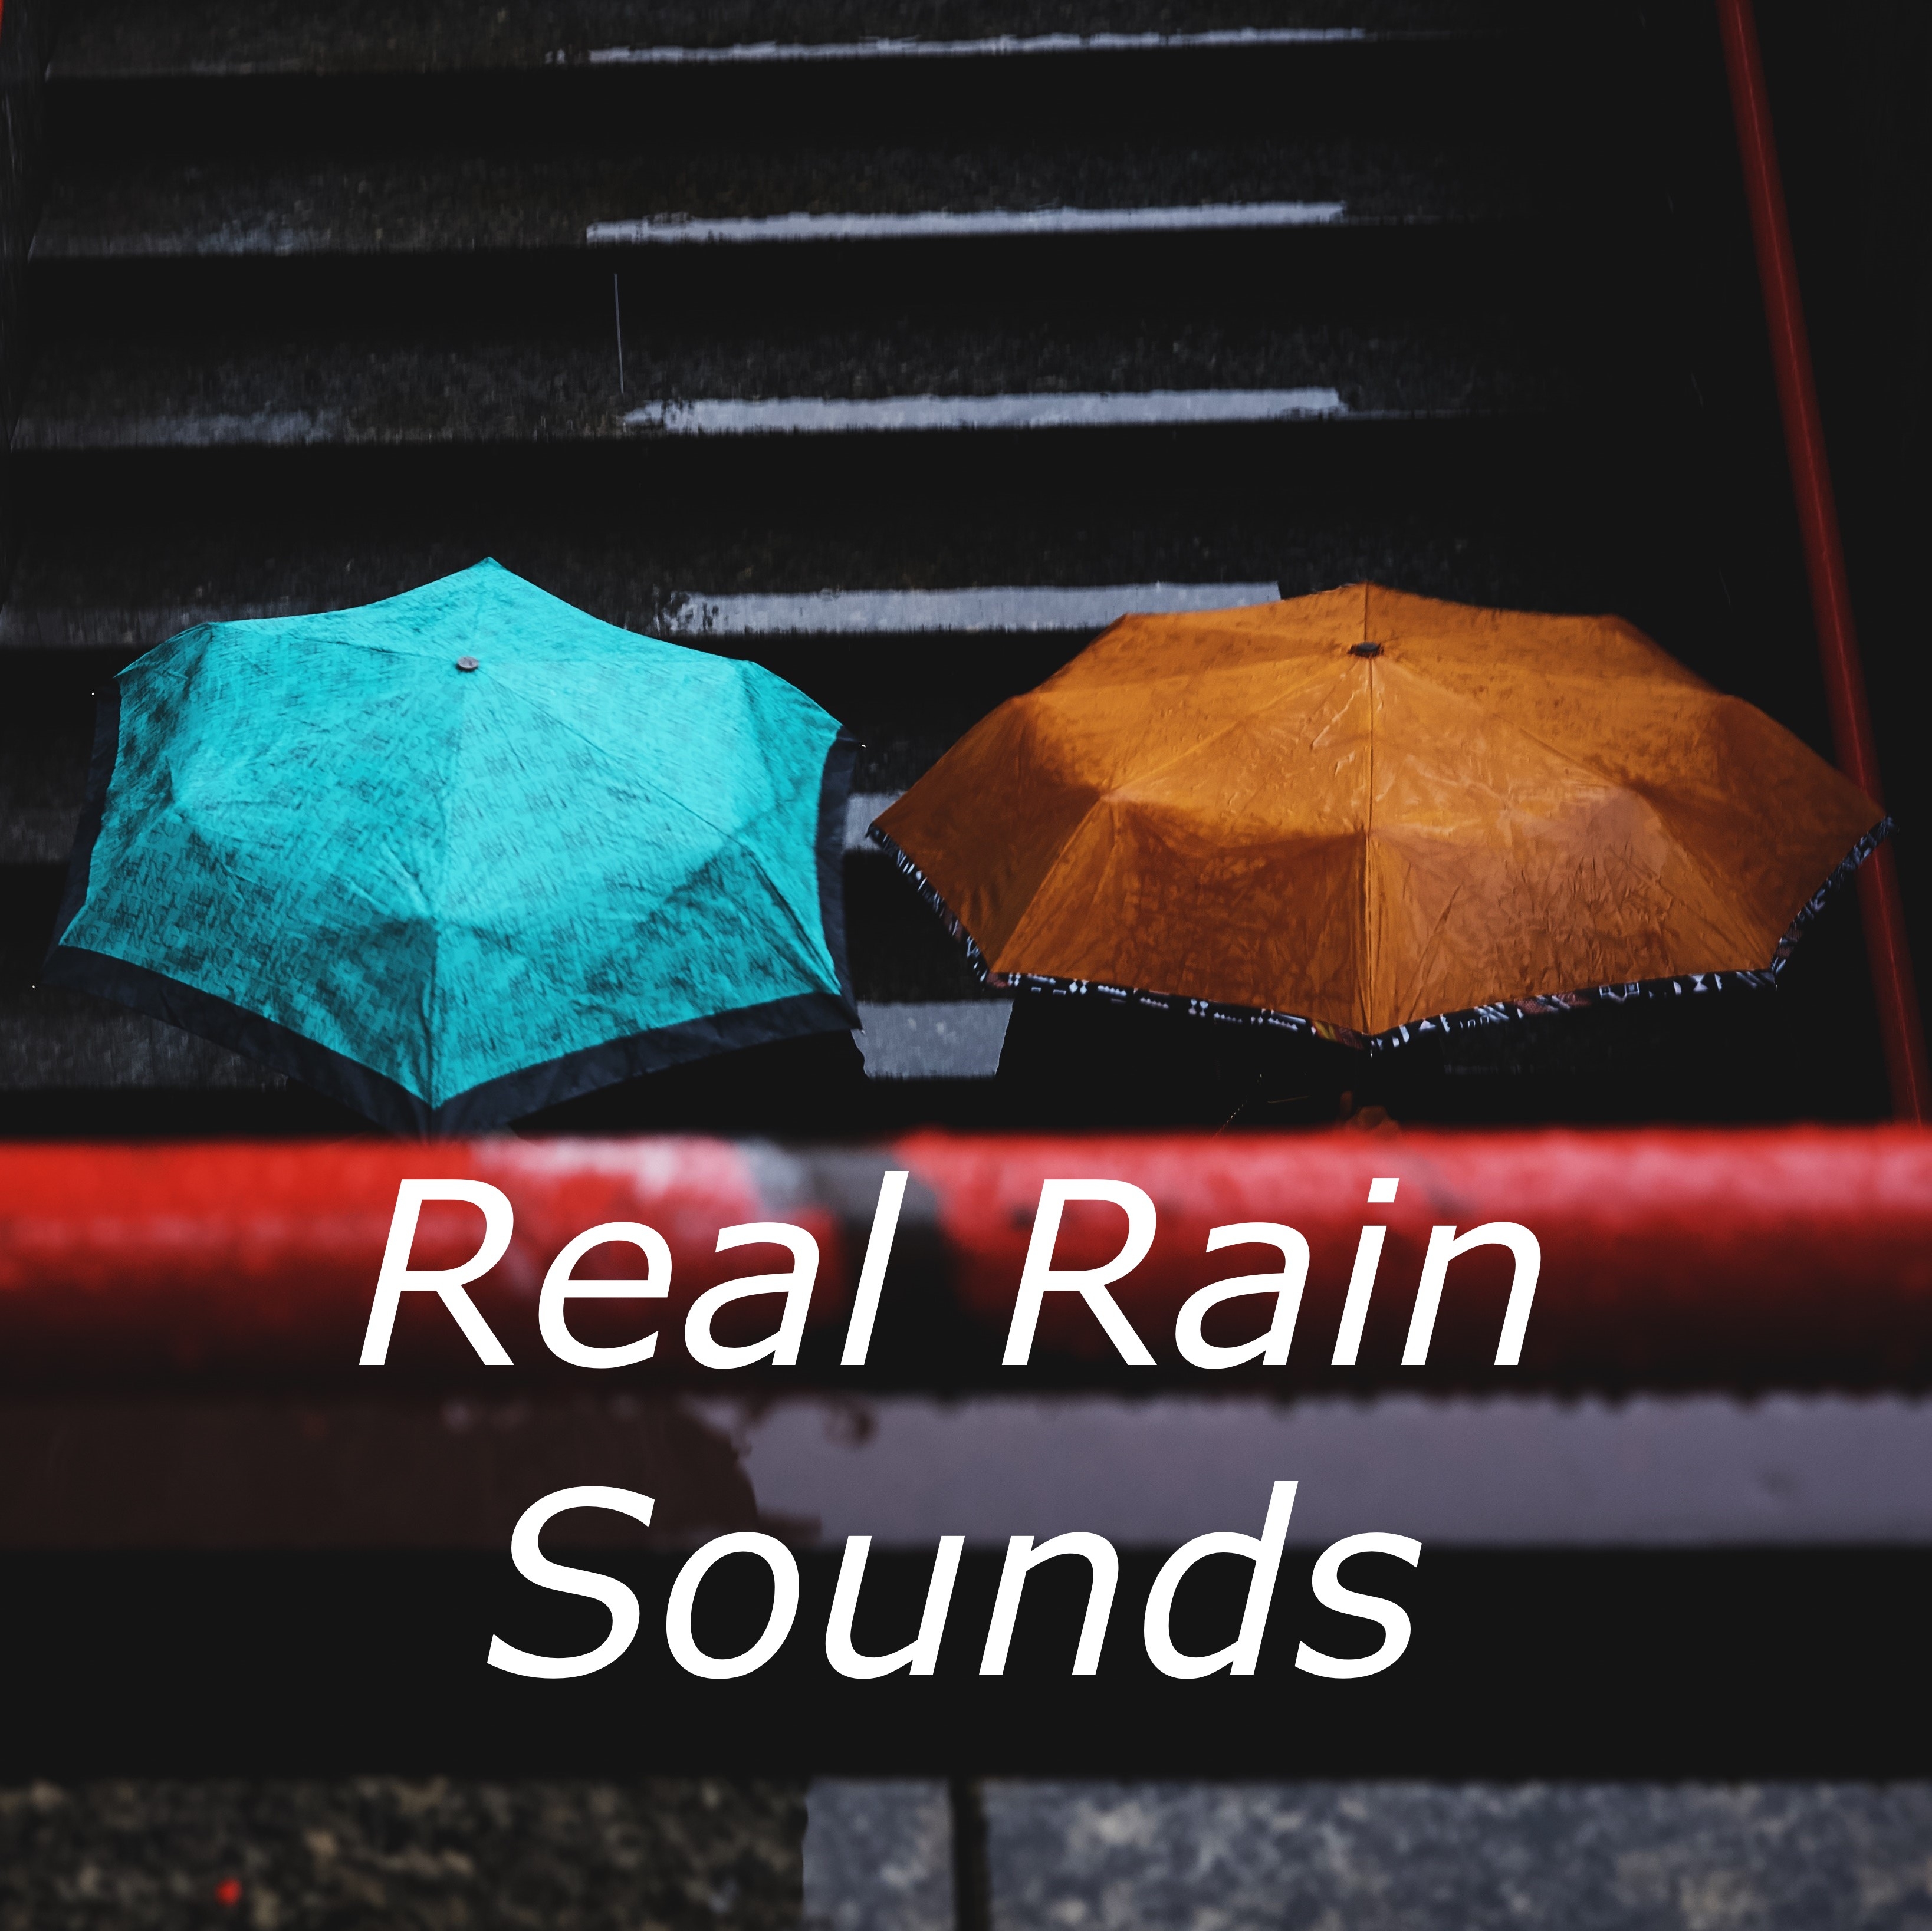 Amazing Rain & Nature Sounds for Yoga and Meditation. Loopable Rain Sounds for Serenity